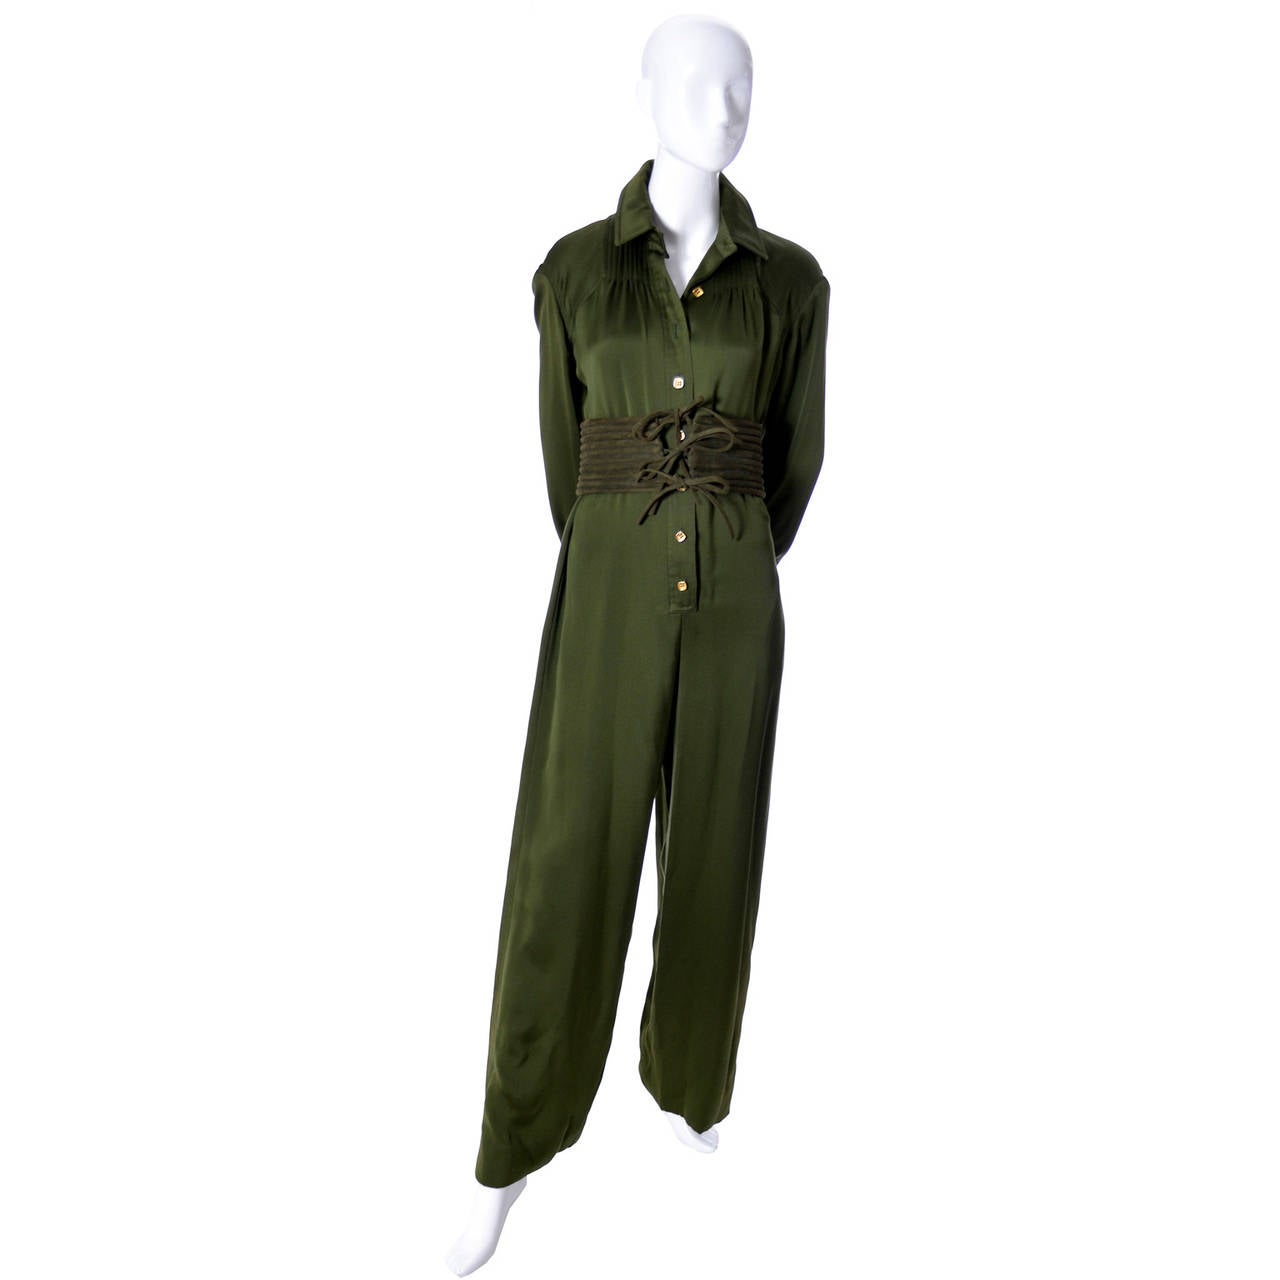 This is such a beautiful green silk jumpsuit from James Galanos with a corset style dark green belt. Perfect for Fall and we think it can be worn in the evening or during the day! We acquired this incredible vintage jumpsuit from a woman who wore